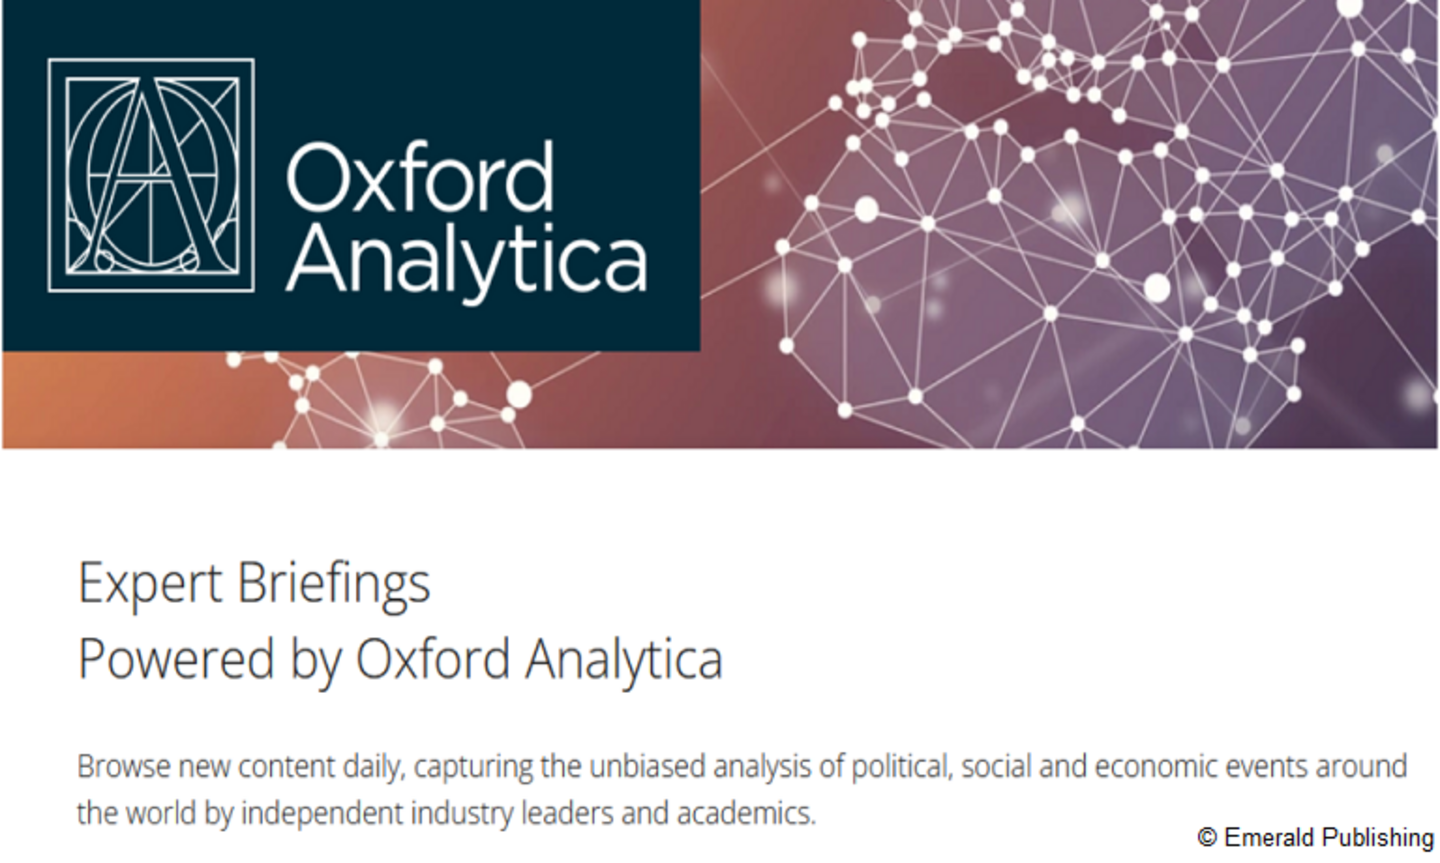 Expert Briefings powered by Oxford Analytica